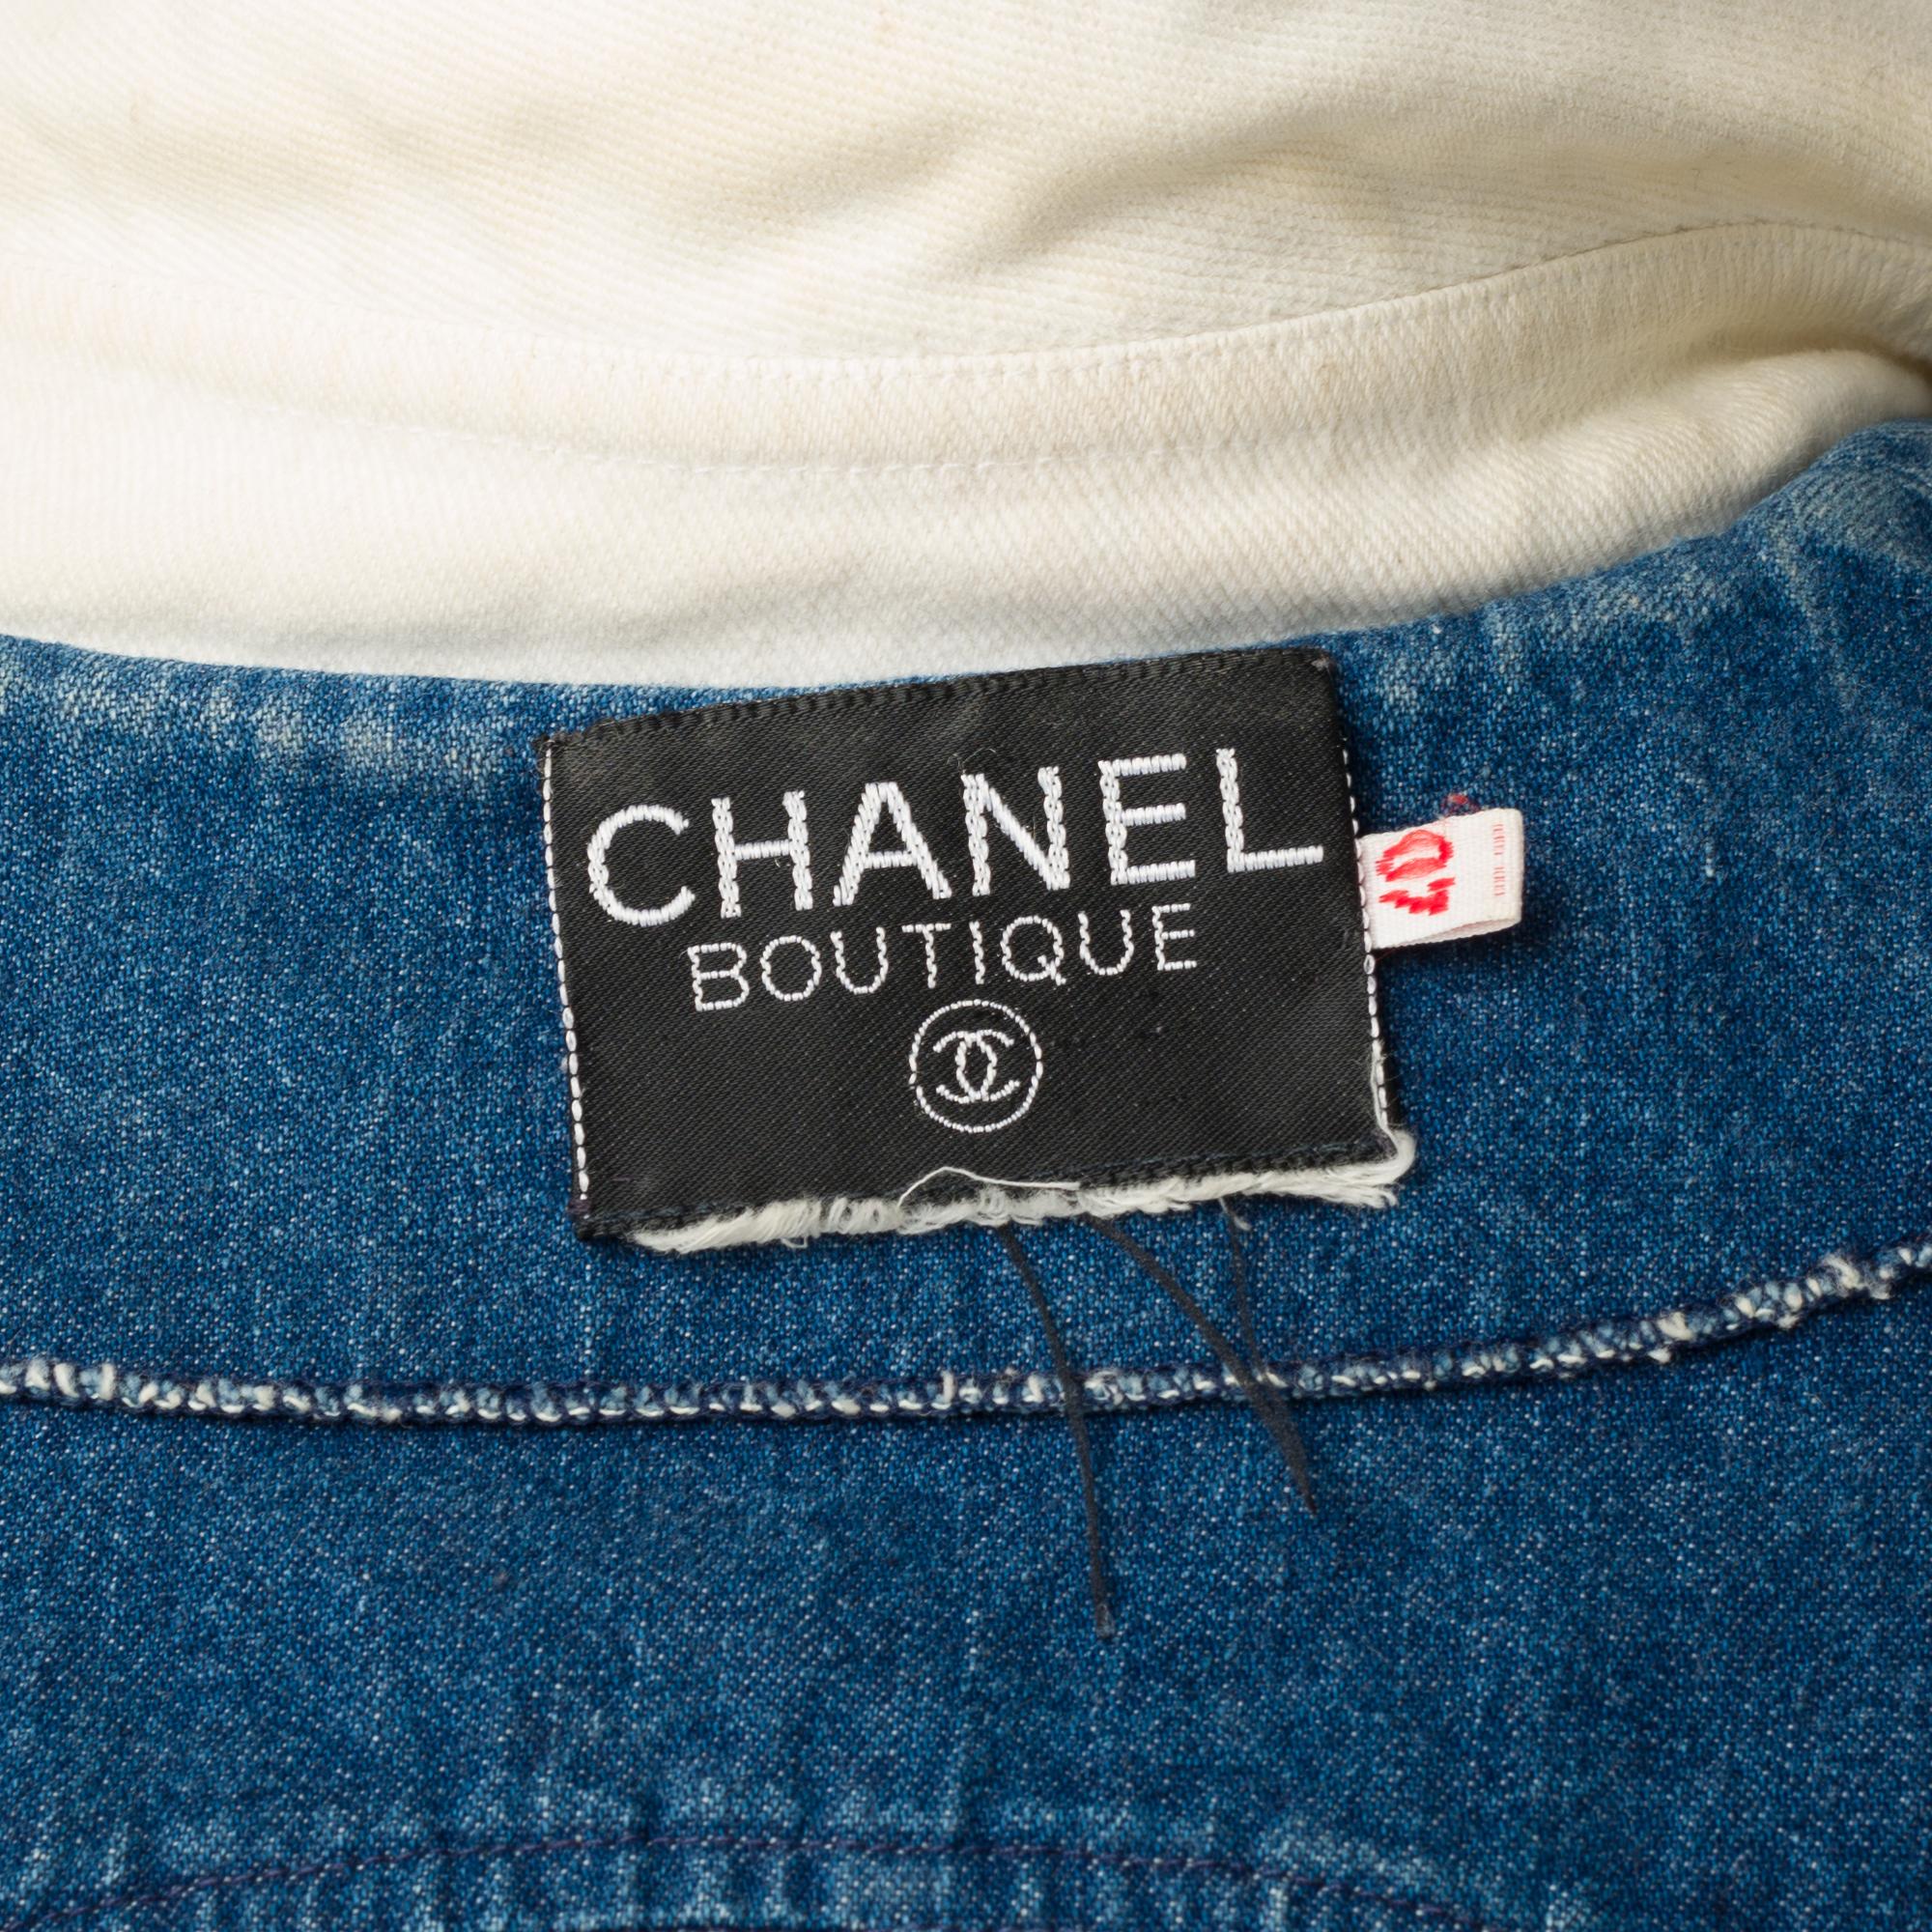 Amazing Chanel Jacket in blue and white denim 2